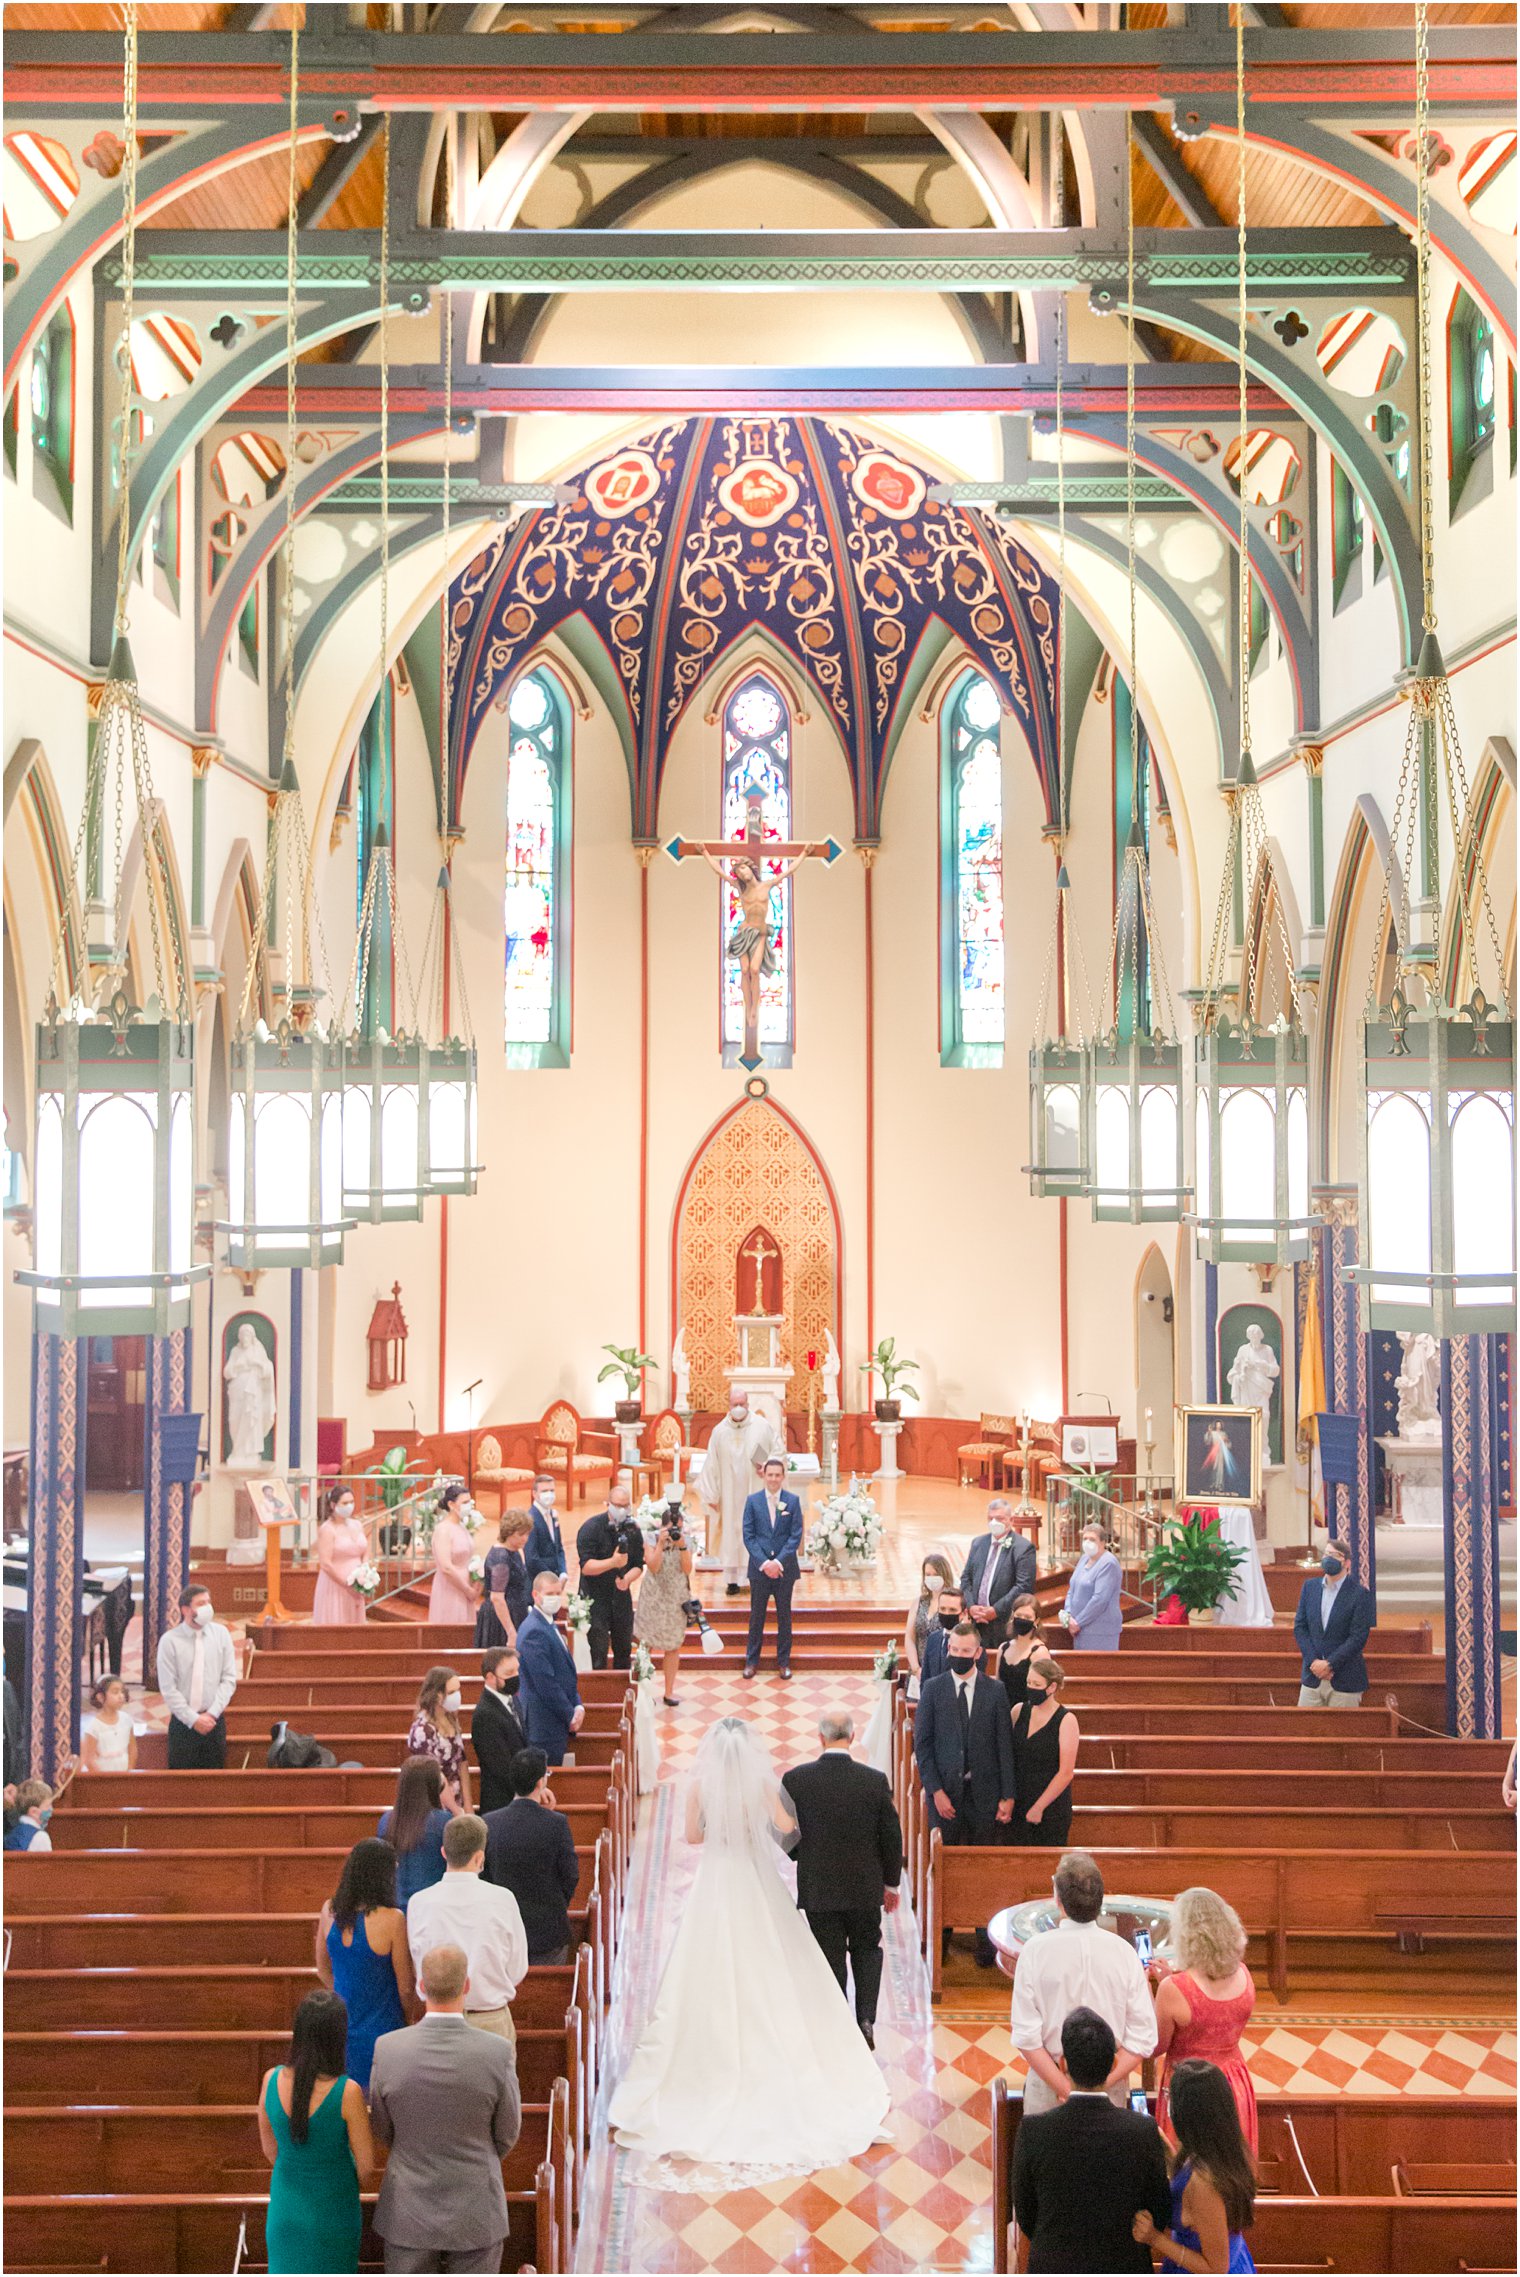 Wedding ceremony at Assumption of the Blessed Virgin Mary Church - Morristown, NJ